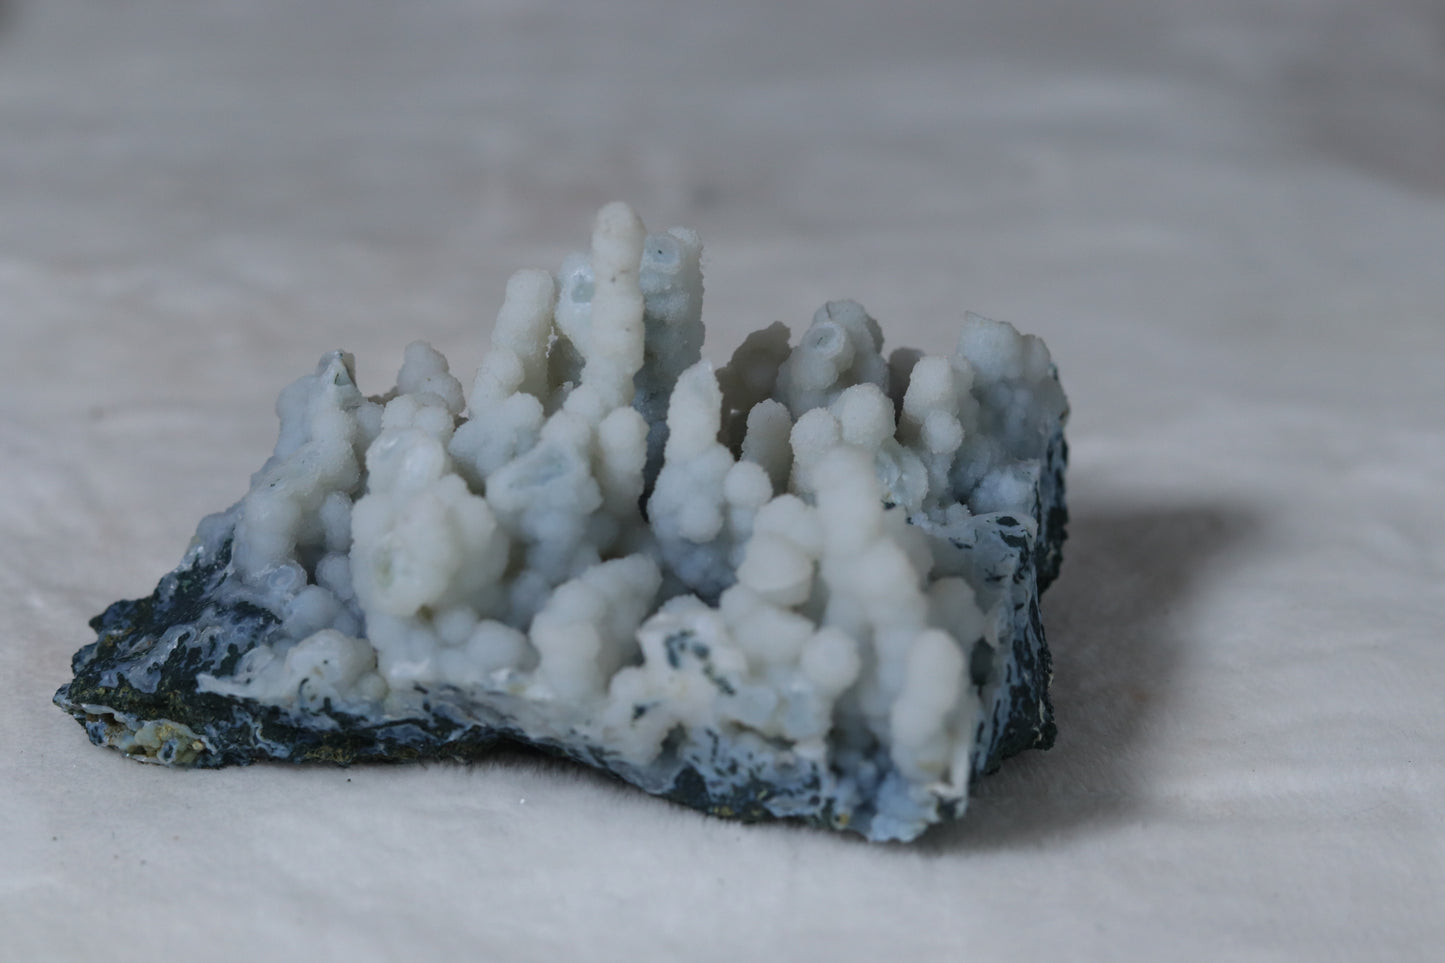 Blue chalcedony coral